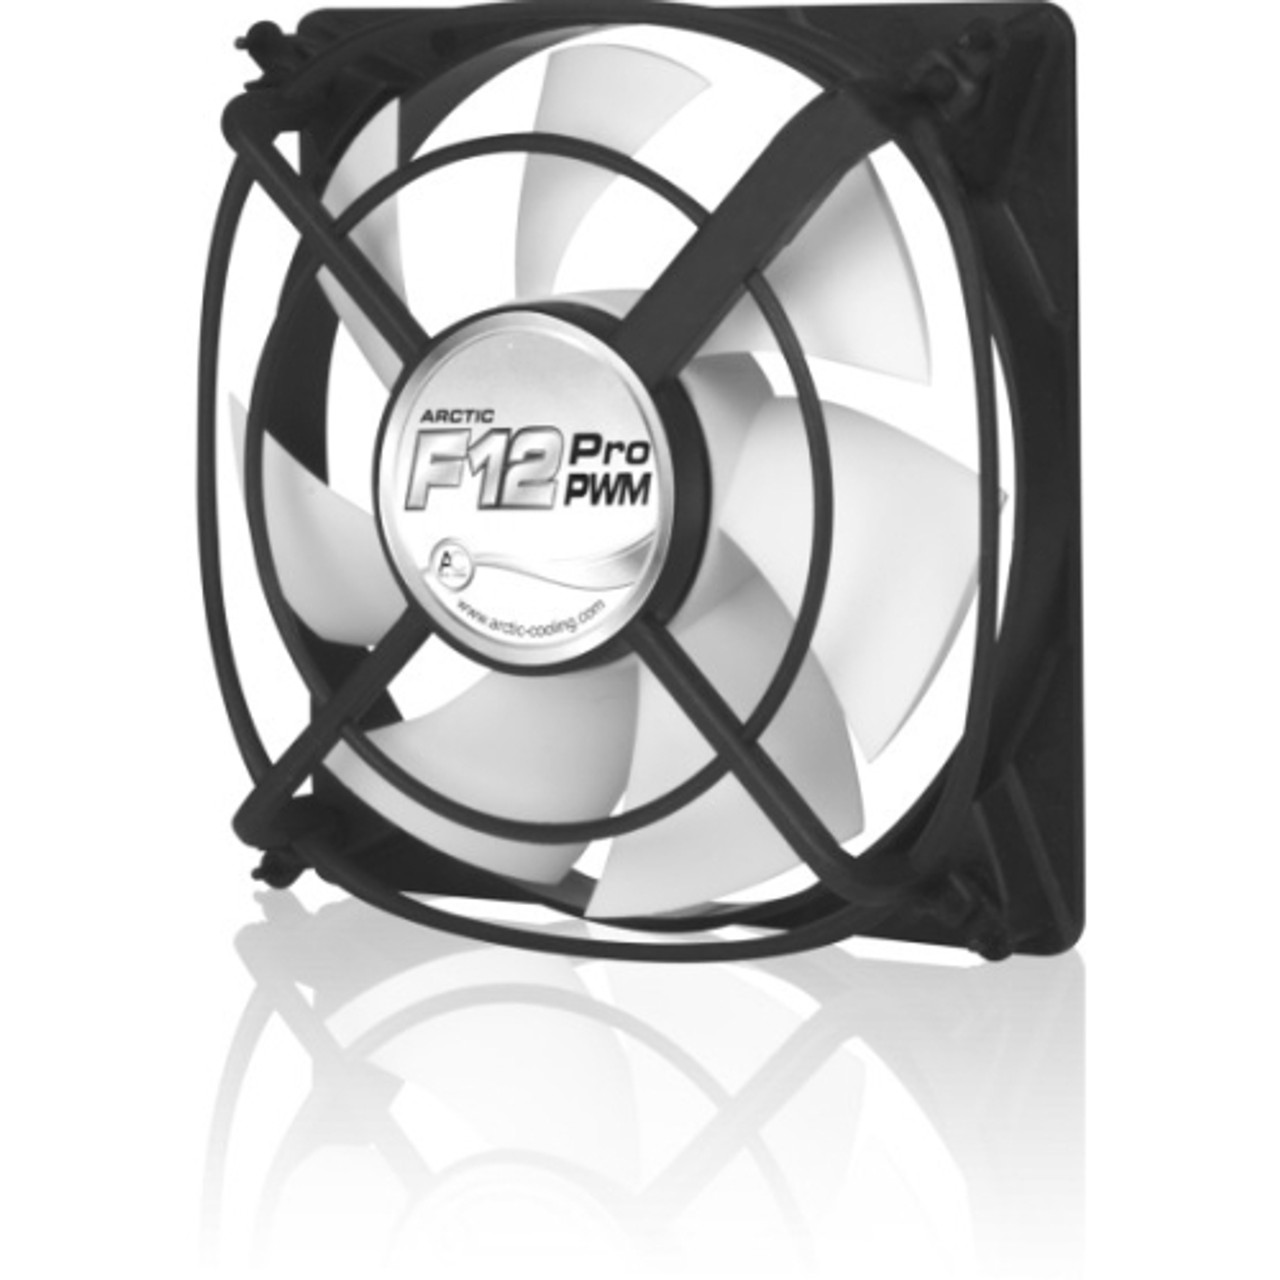 AFACO-12PP0-GBA01 Arctic Cooling Arctic F12 Pro Pwm 120mm Case Fan